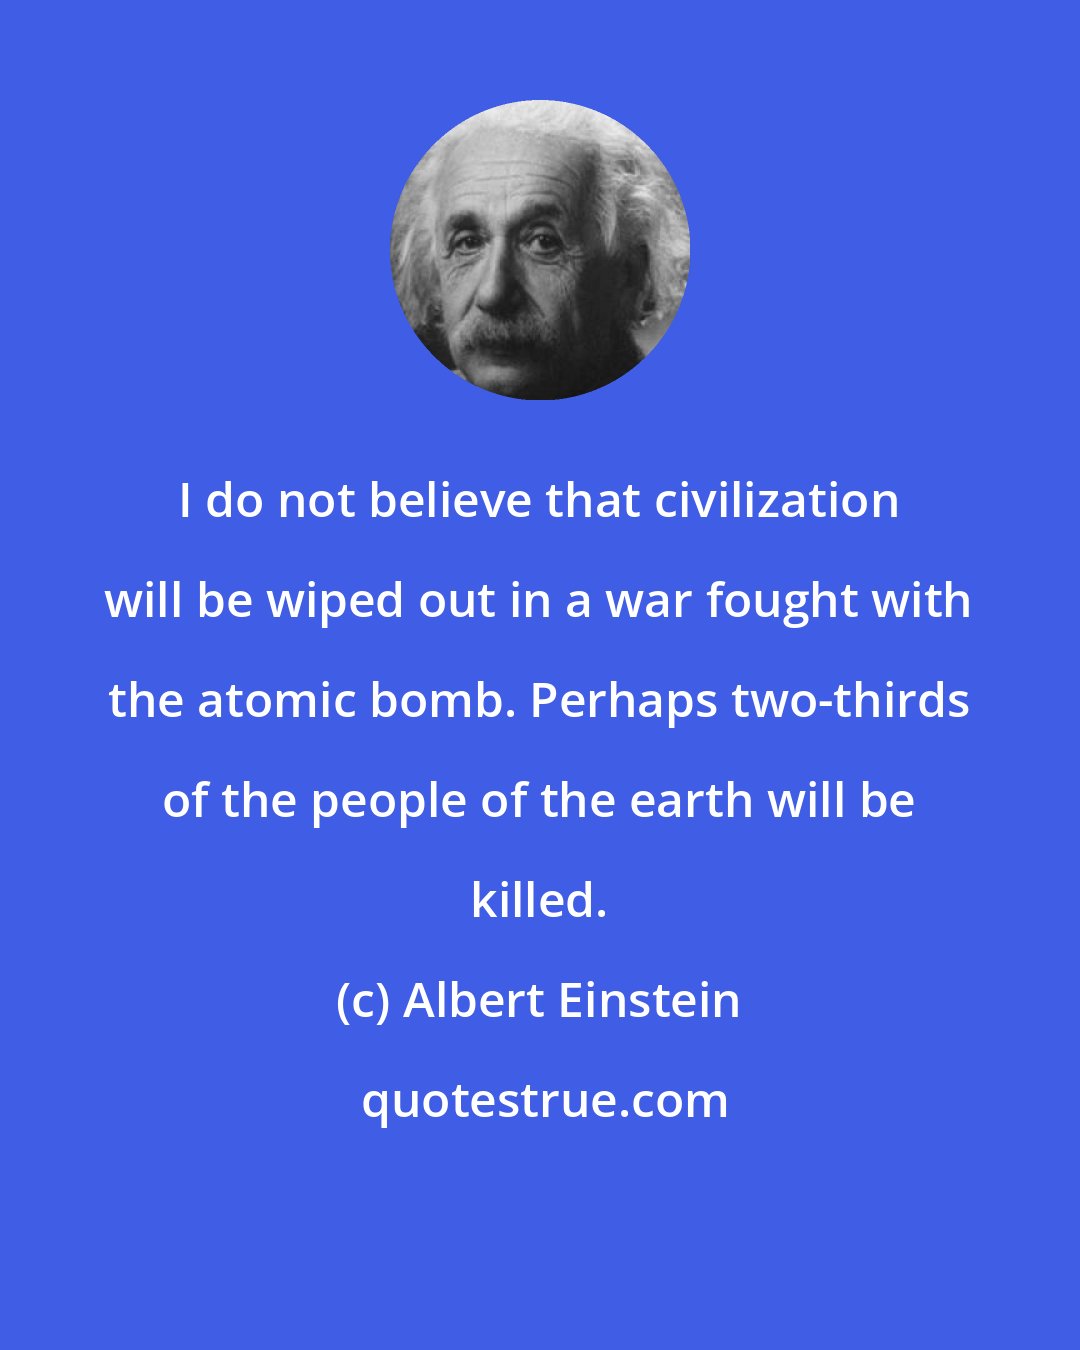 Albert Einstein: I do not believe that civilization will be wiped out in a war fought with the atomic bomb. Perhaps two-thirds of the people of the earth will be killed.